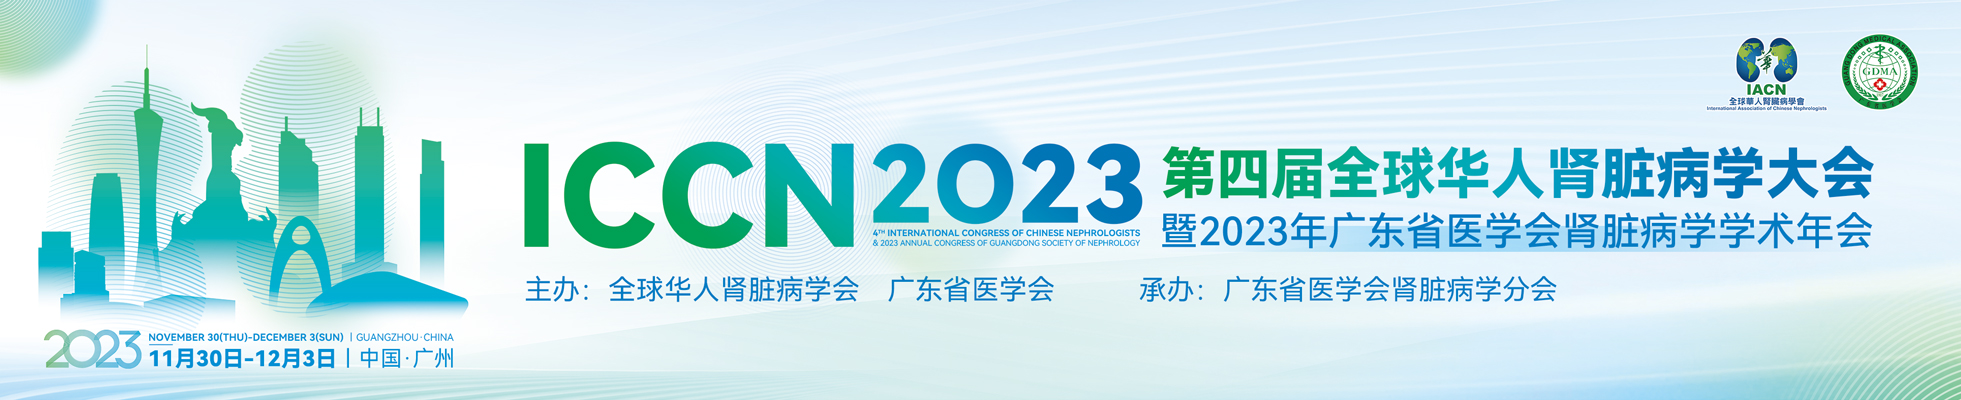 The 4th Global Chinese Congress of Nephrology and the 2023 Annual Conference of Nephrology of Guangdong Medical Association